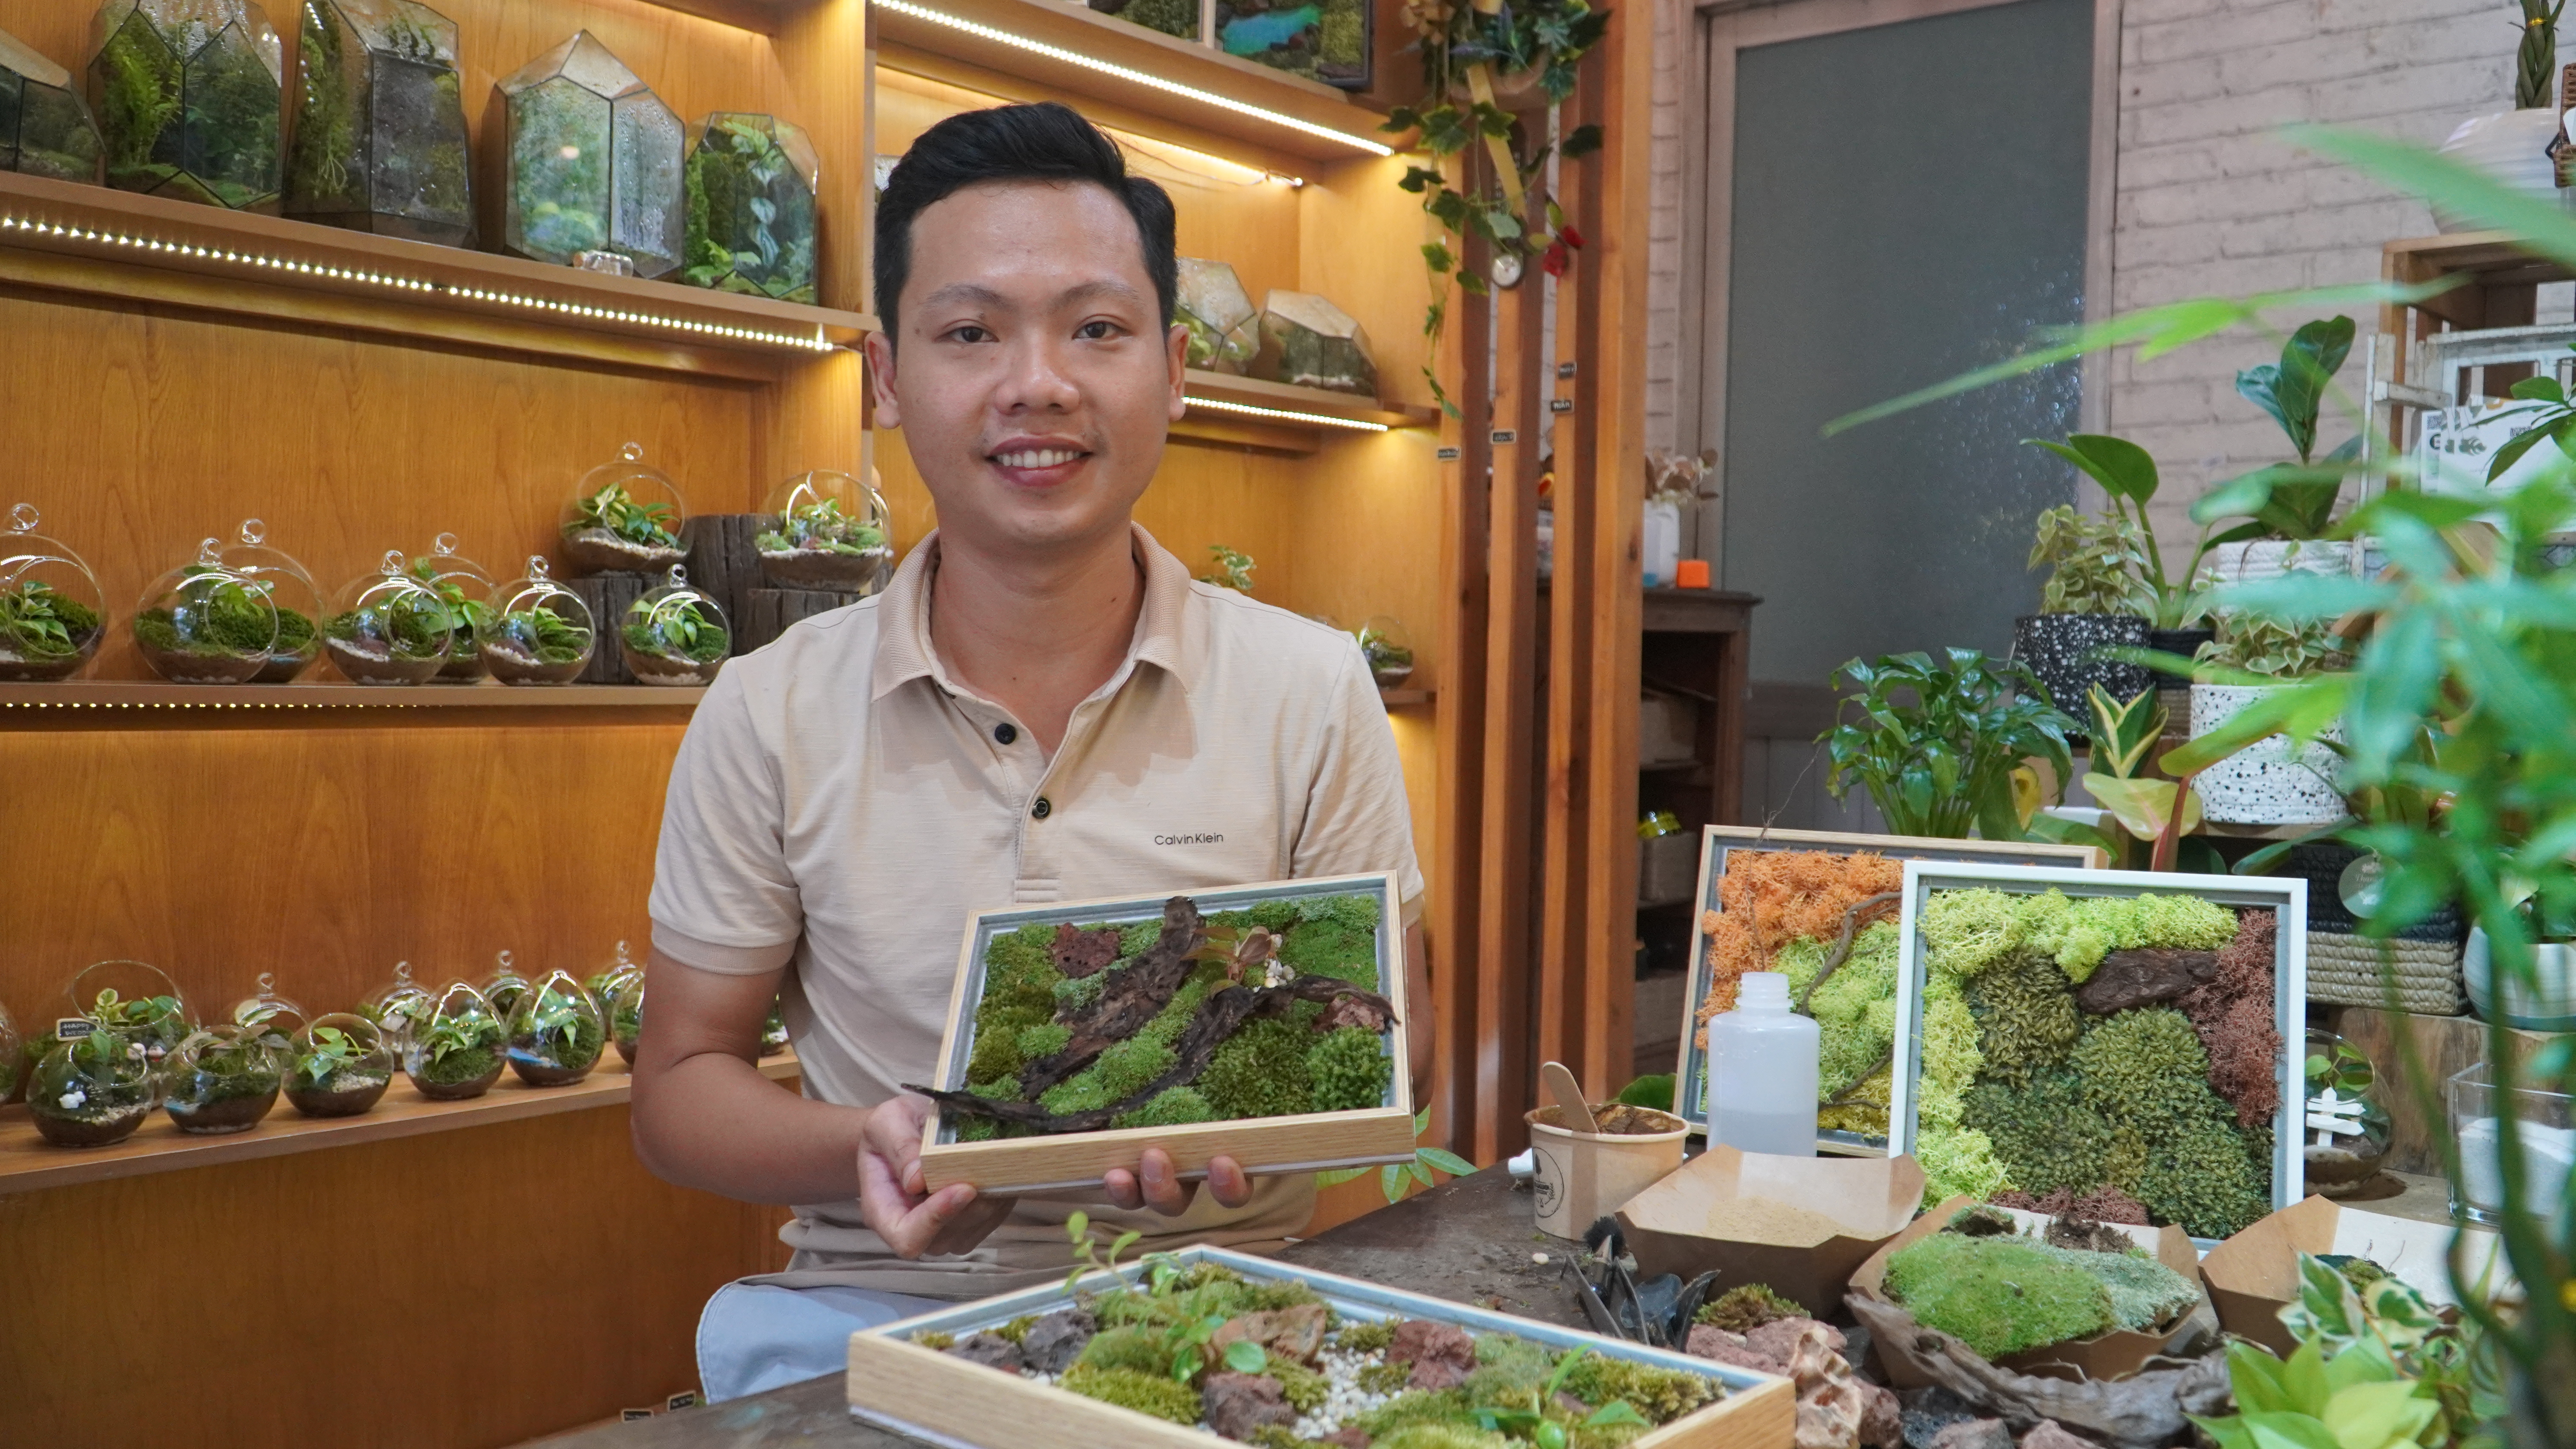 Tran Duc Lap poses with a moss picture. Photo: Ngoc Phuong / Tuoi Tre News